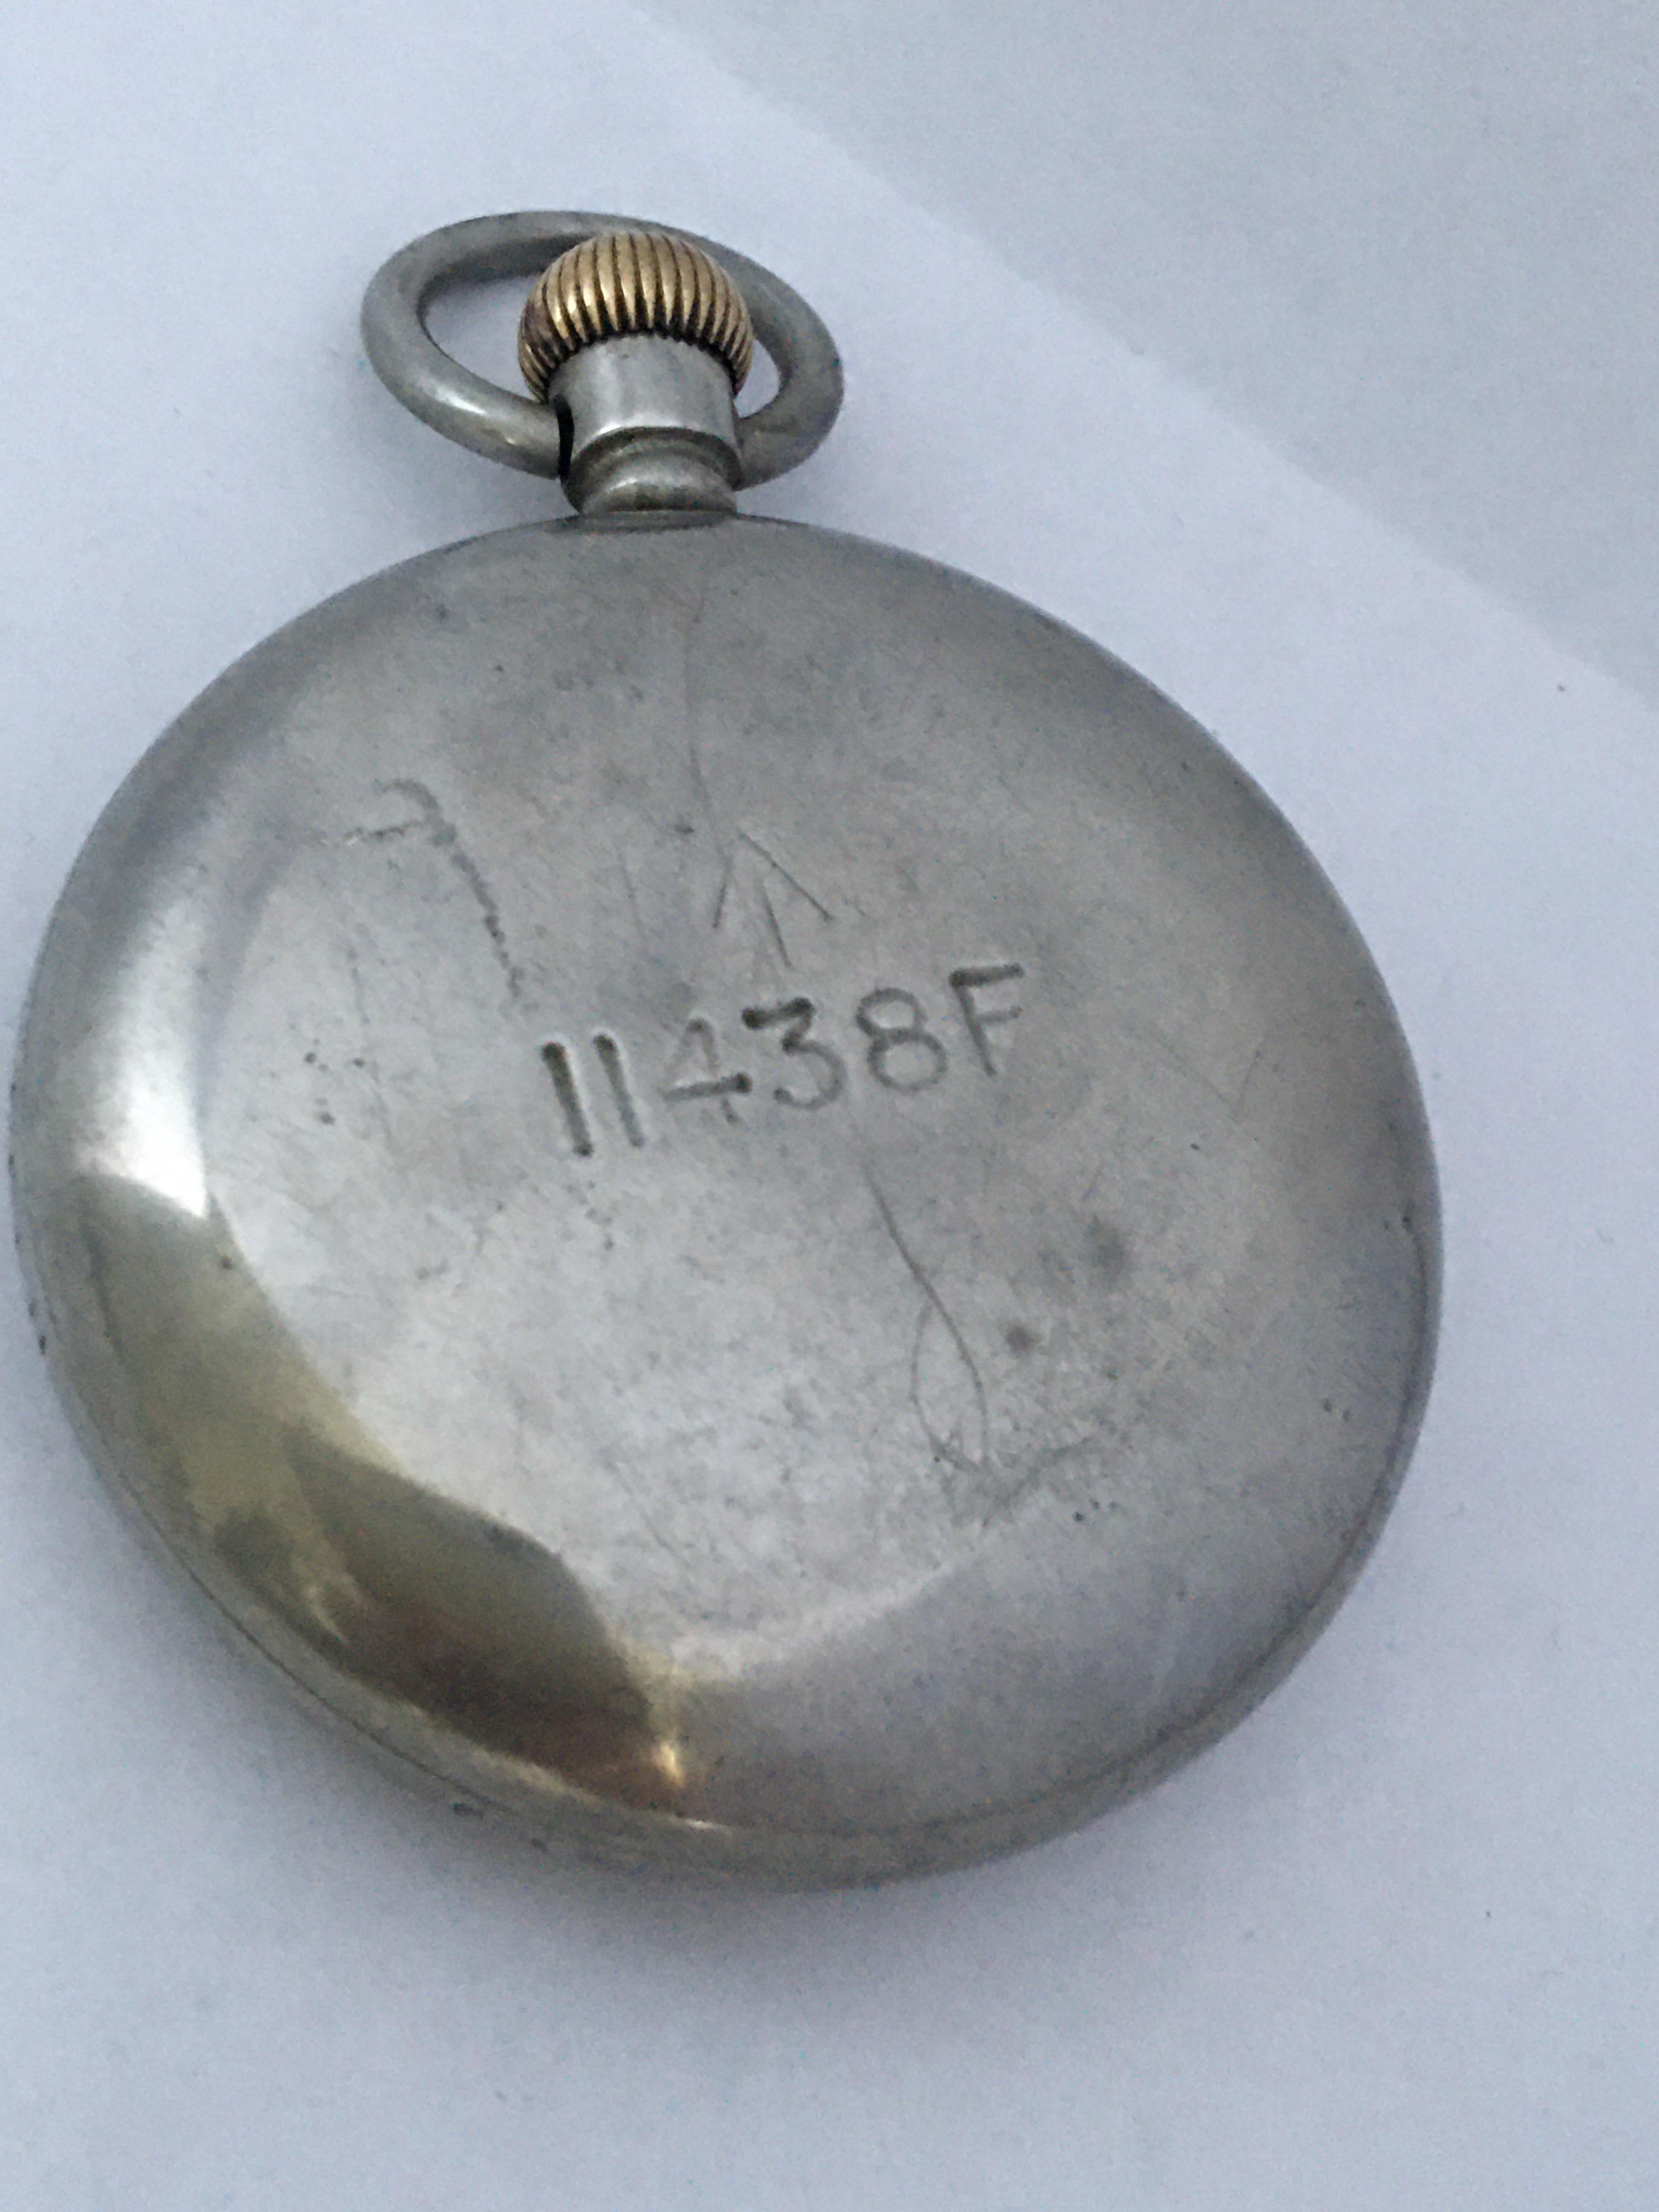 1st World War military watch, General Services pattern
Heavy screw back and front nickel case by Dennison, the back cover and band stamped with the government Broad Arrow mark and numbered 11438F and the same numbers written on the dial. 

Founded